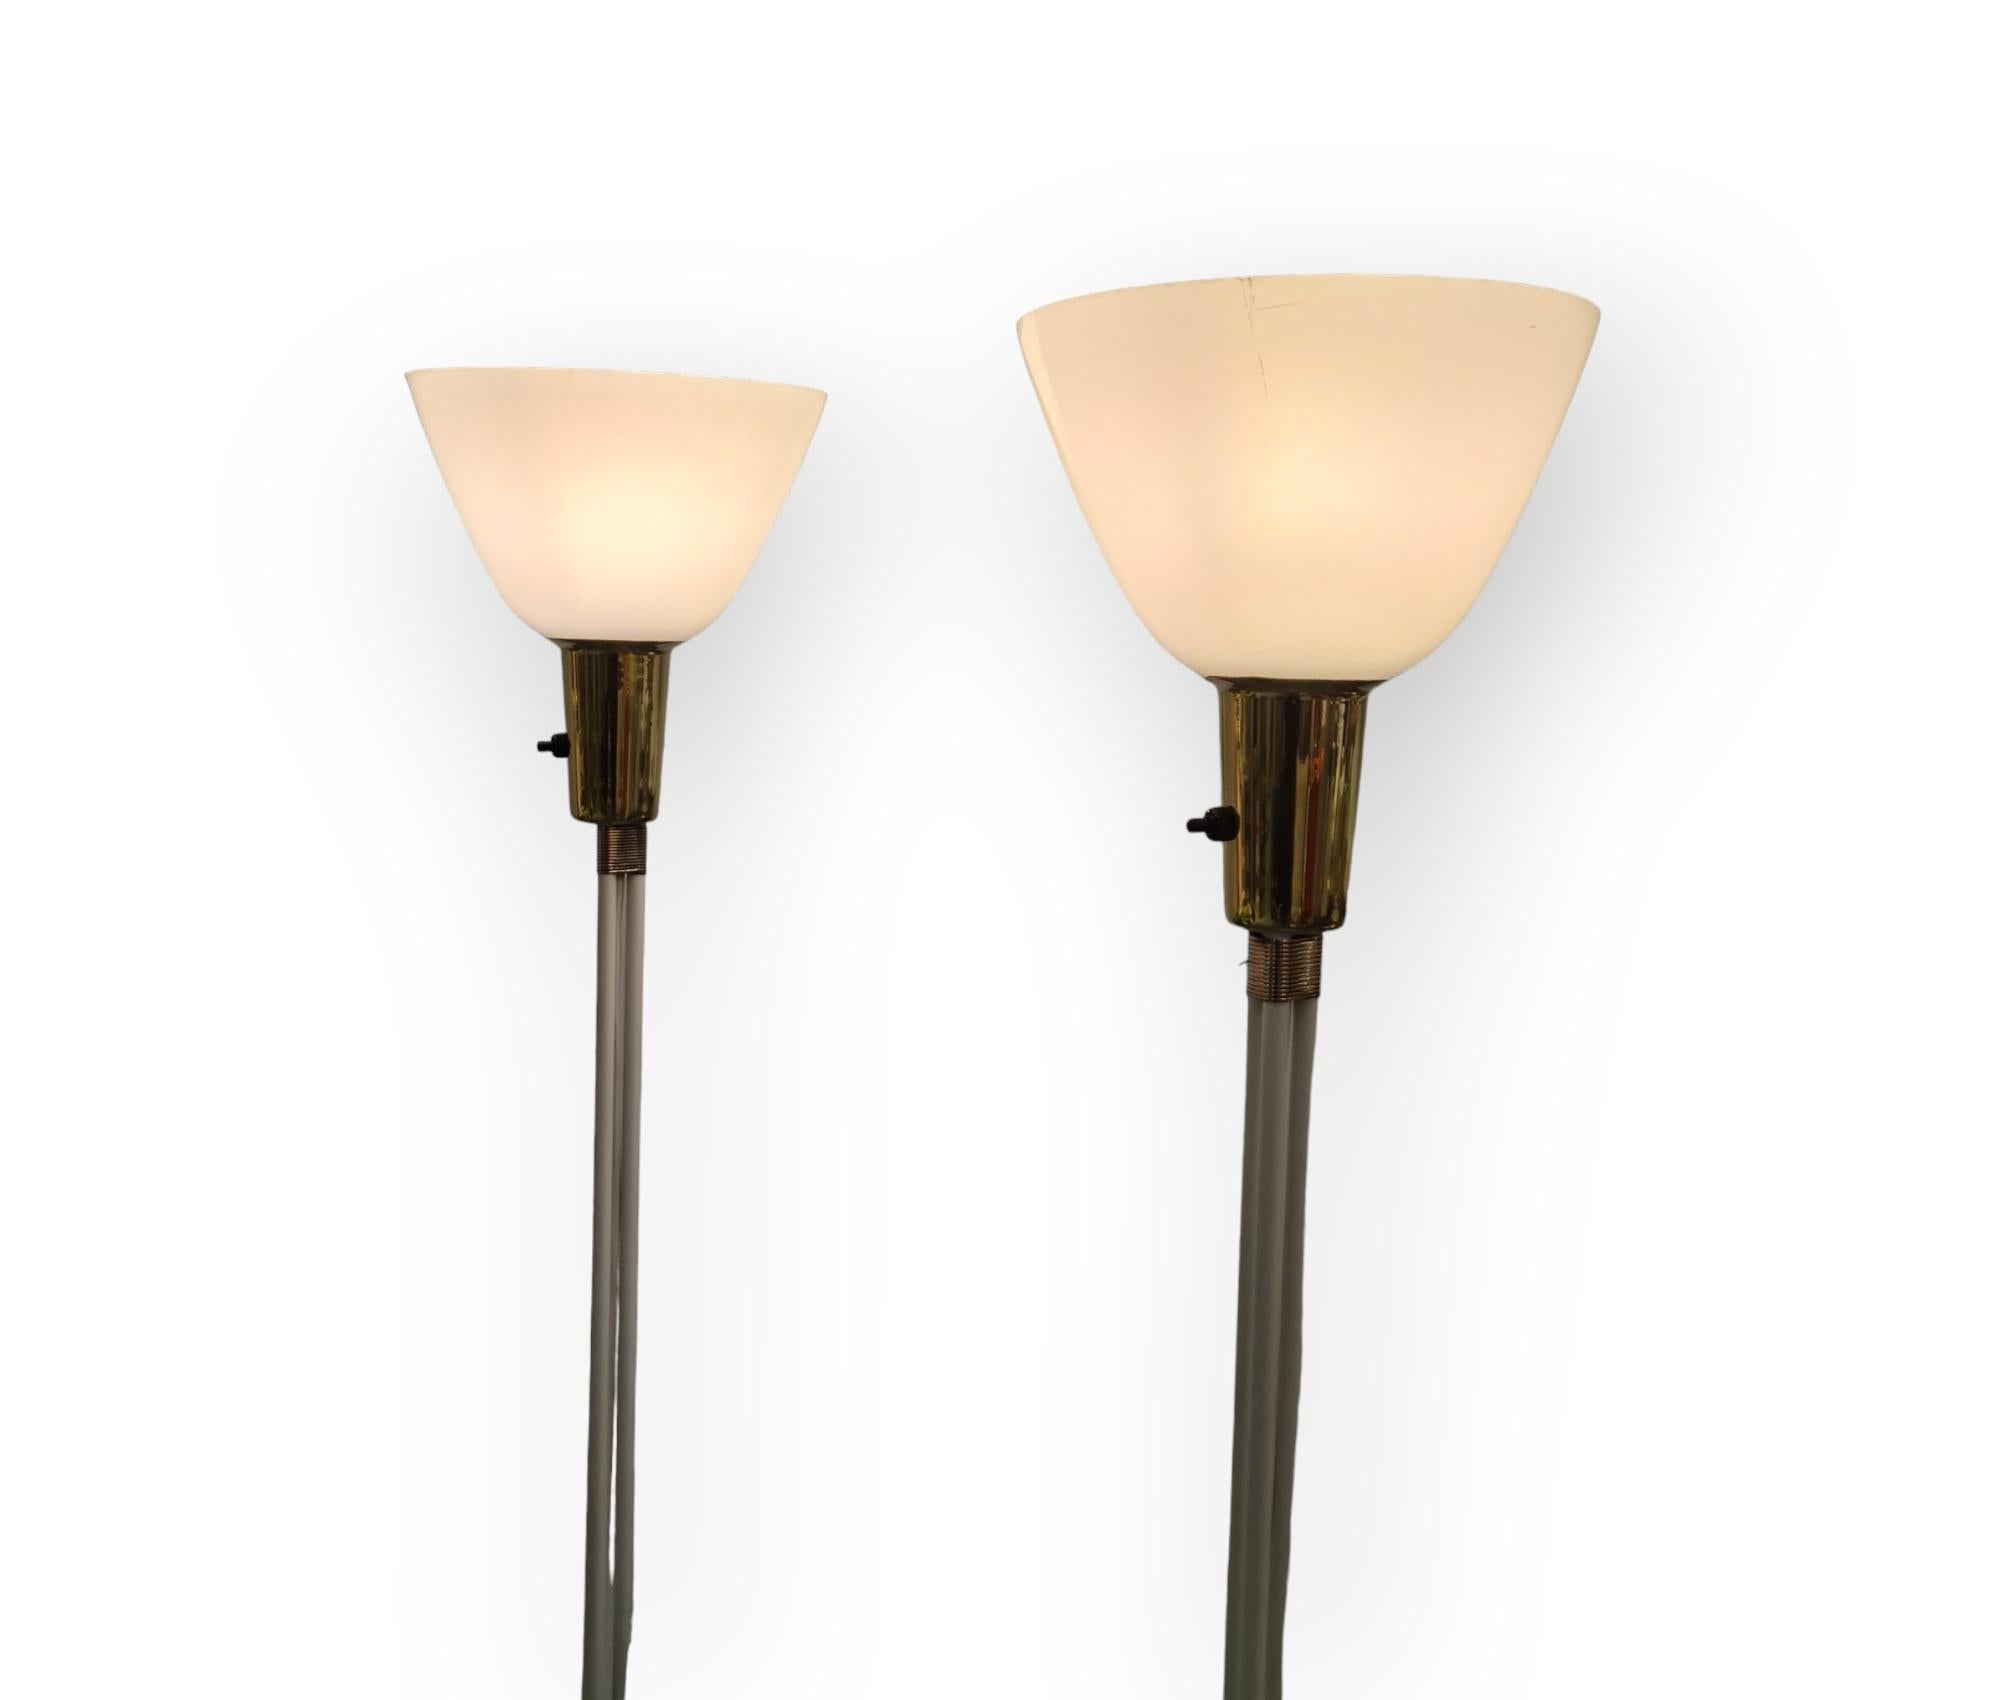 Pair of Lisa Johansson-Papé floor lamps for Orno, model 30-058, 1950s 4